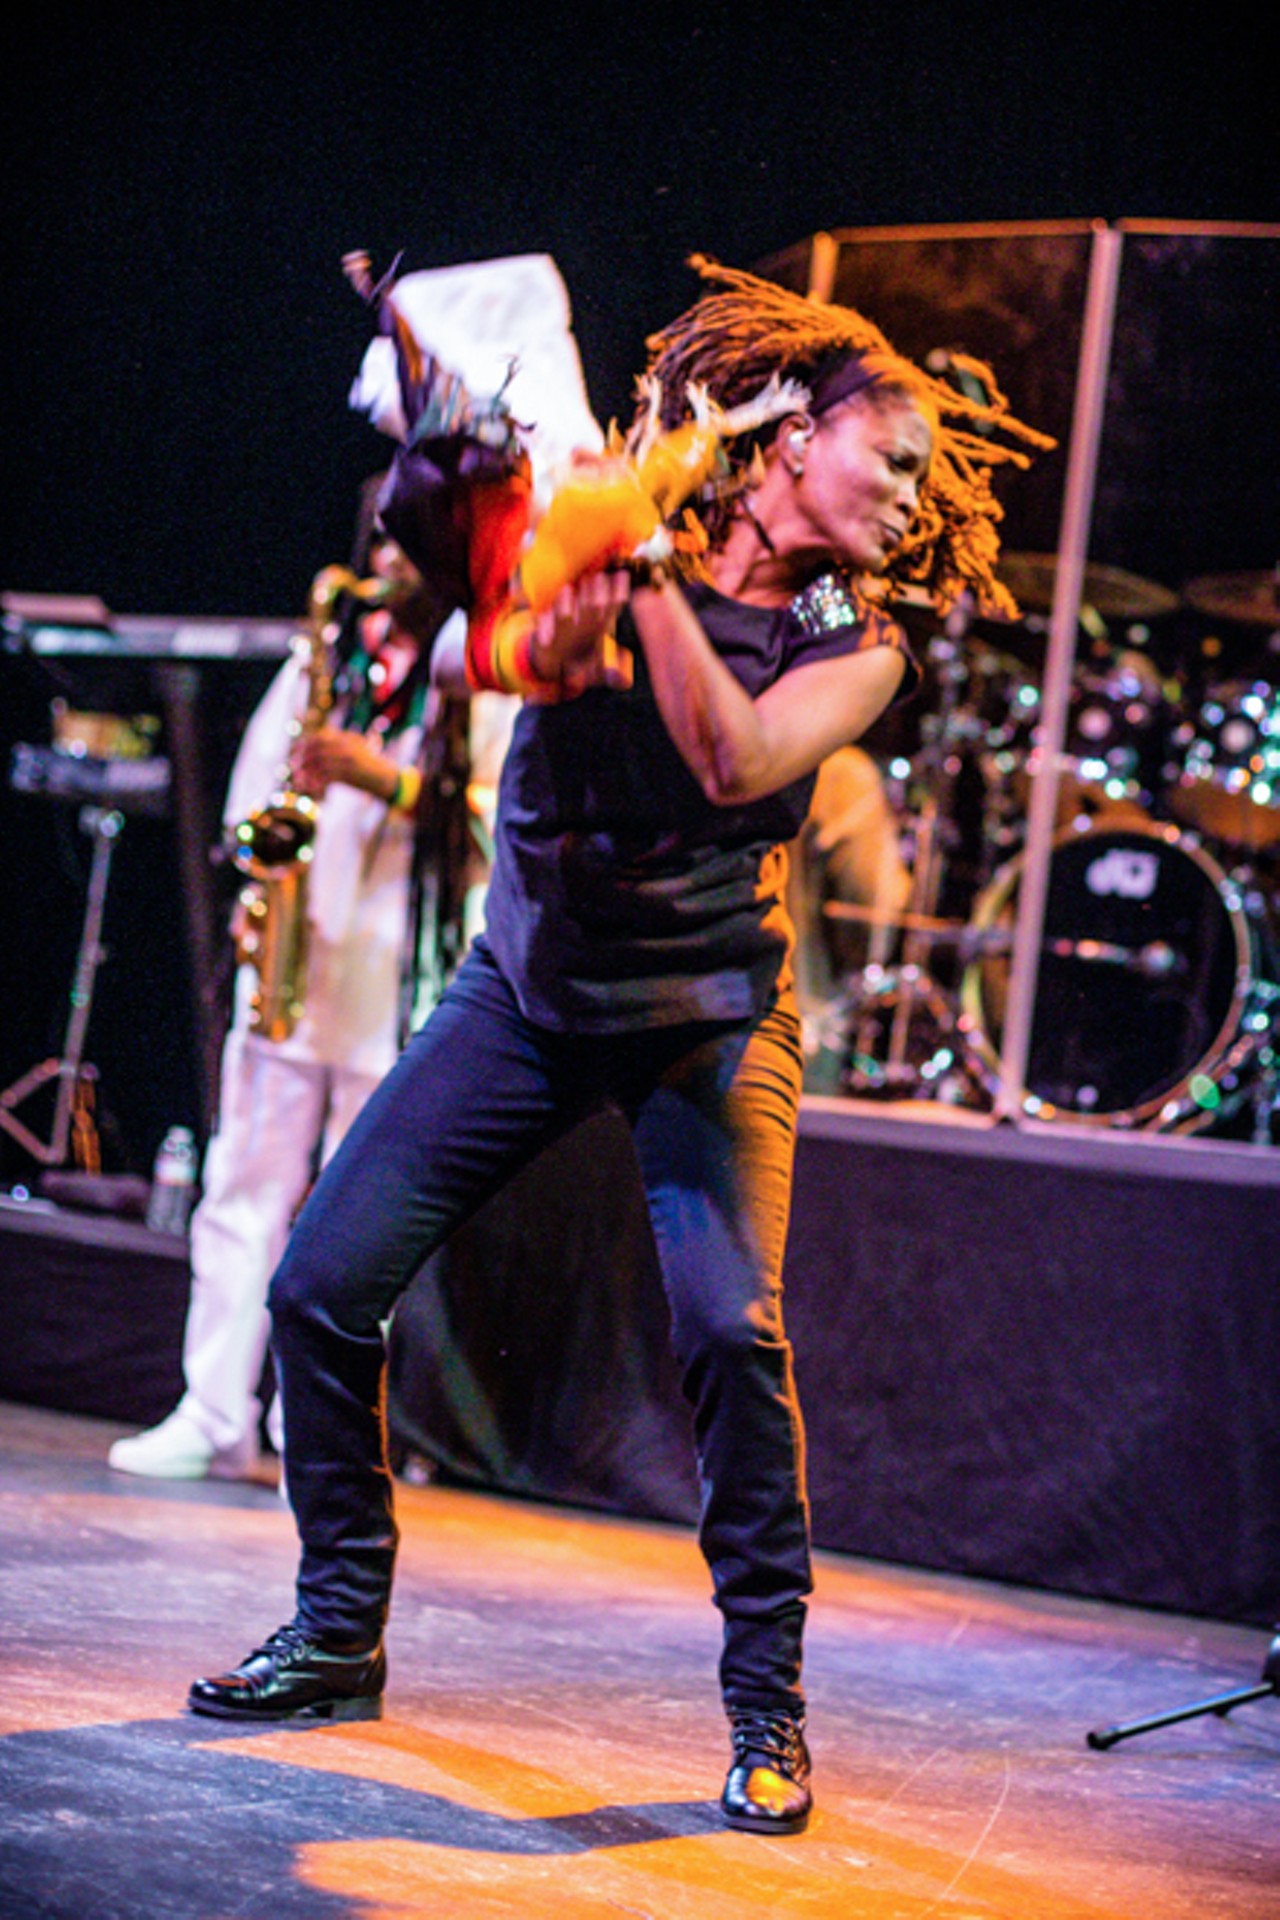 Steppin' out: Photos from Steel Pulse at the Plaza Live